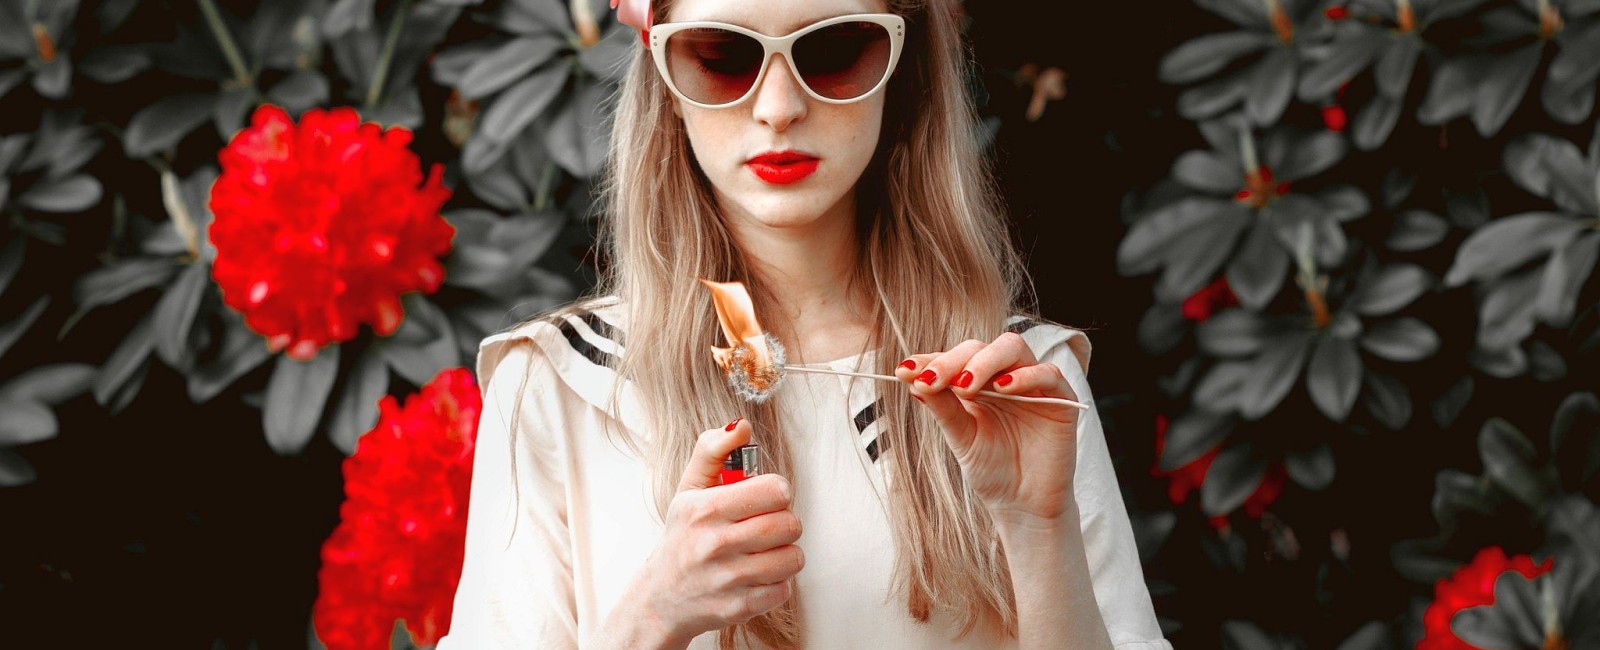 A young woman wearing sunglasses setting a dandelion alight with a cigarette lighter